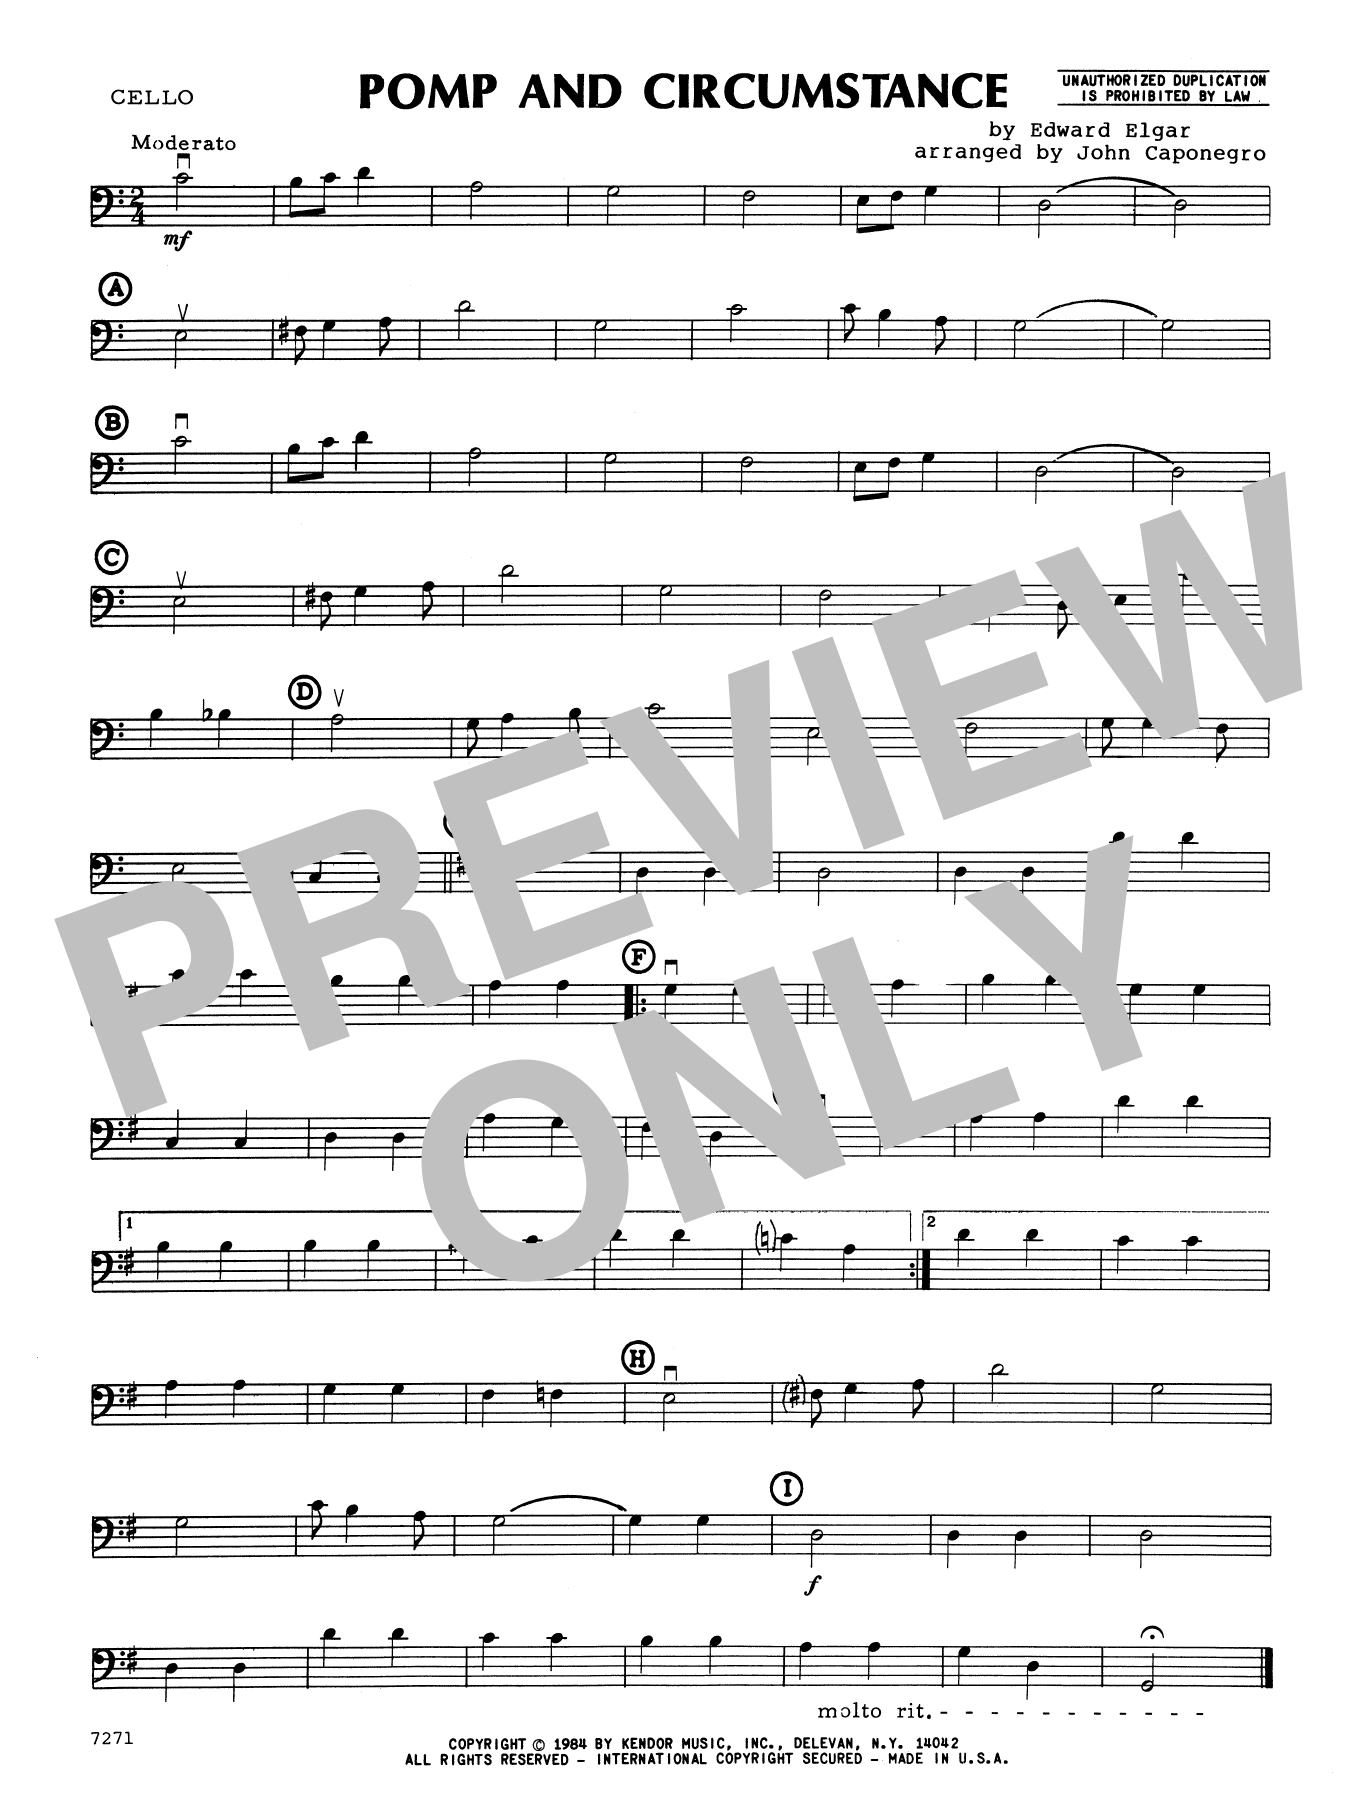 Download John Caponegro Pomp And Circumstance - Cello Sheet Music